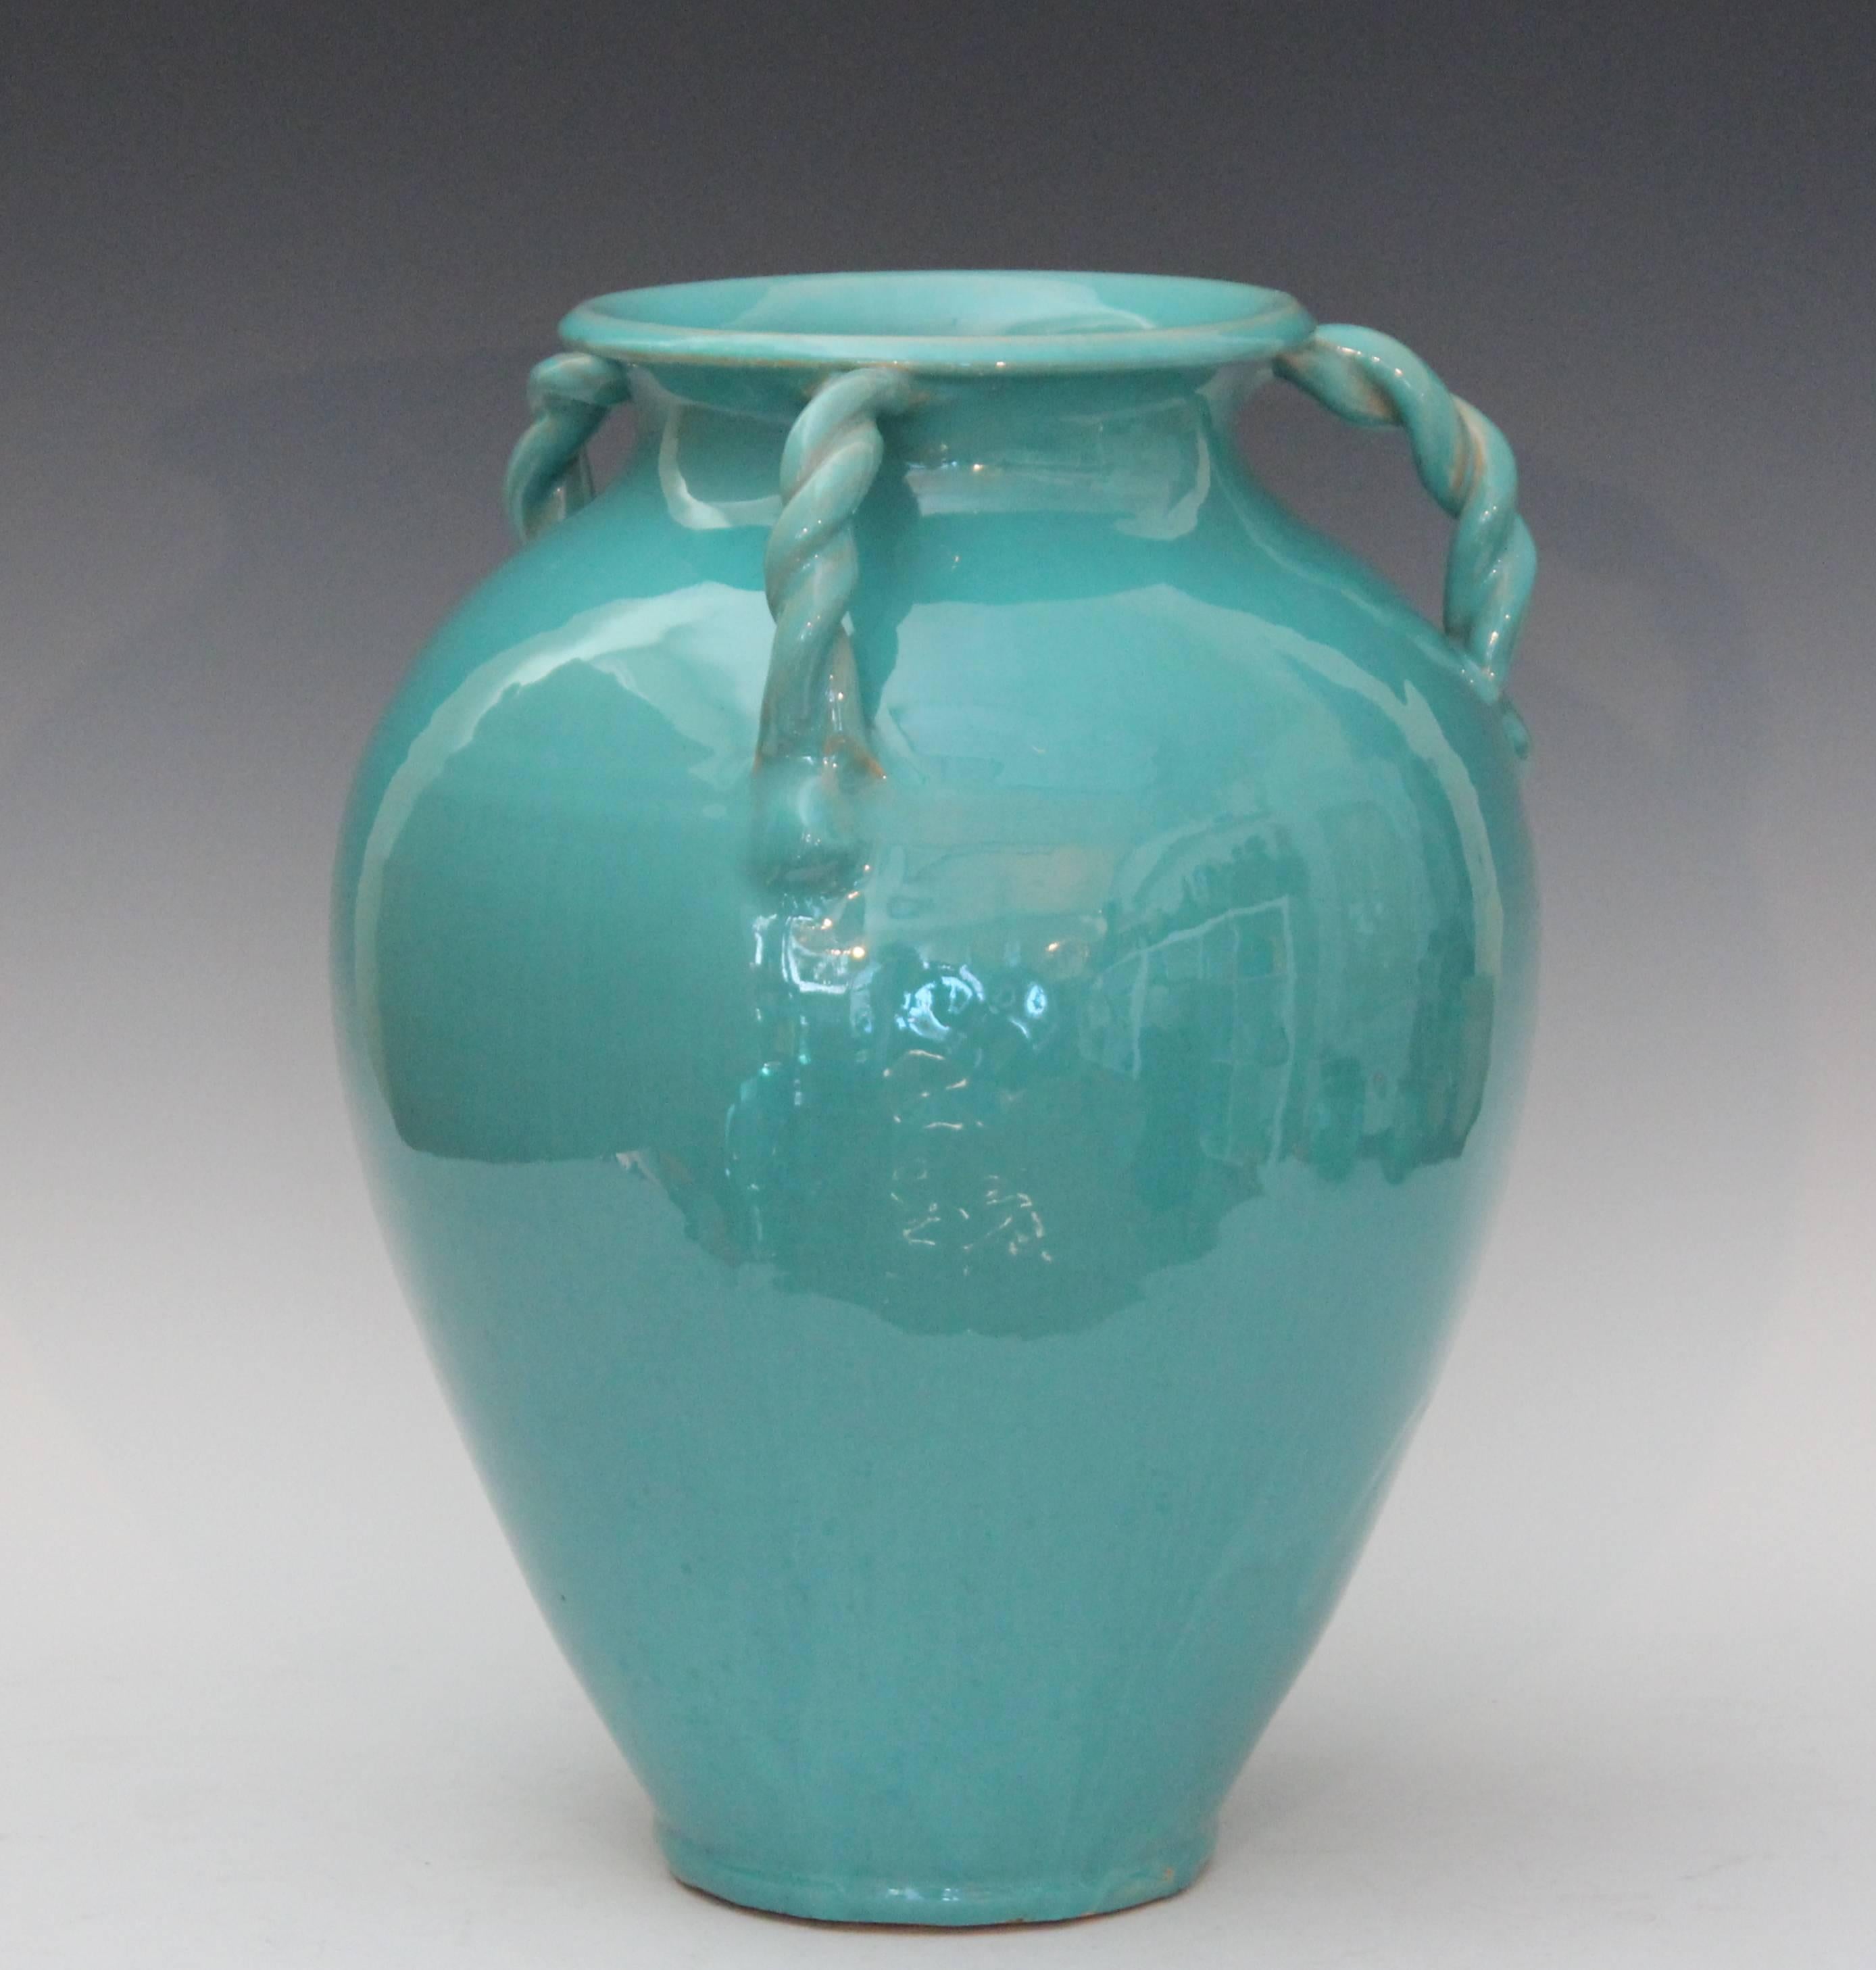 Large Royal Crown vase in turquoise glaze with three rope twist handles, circa 1940. Measures: 13 1/2